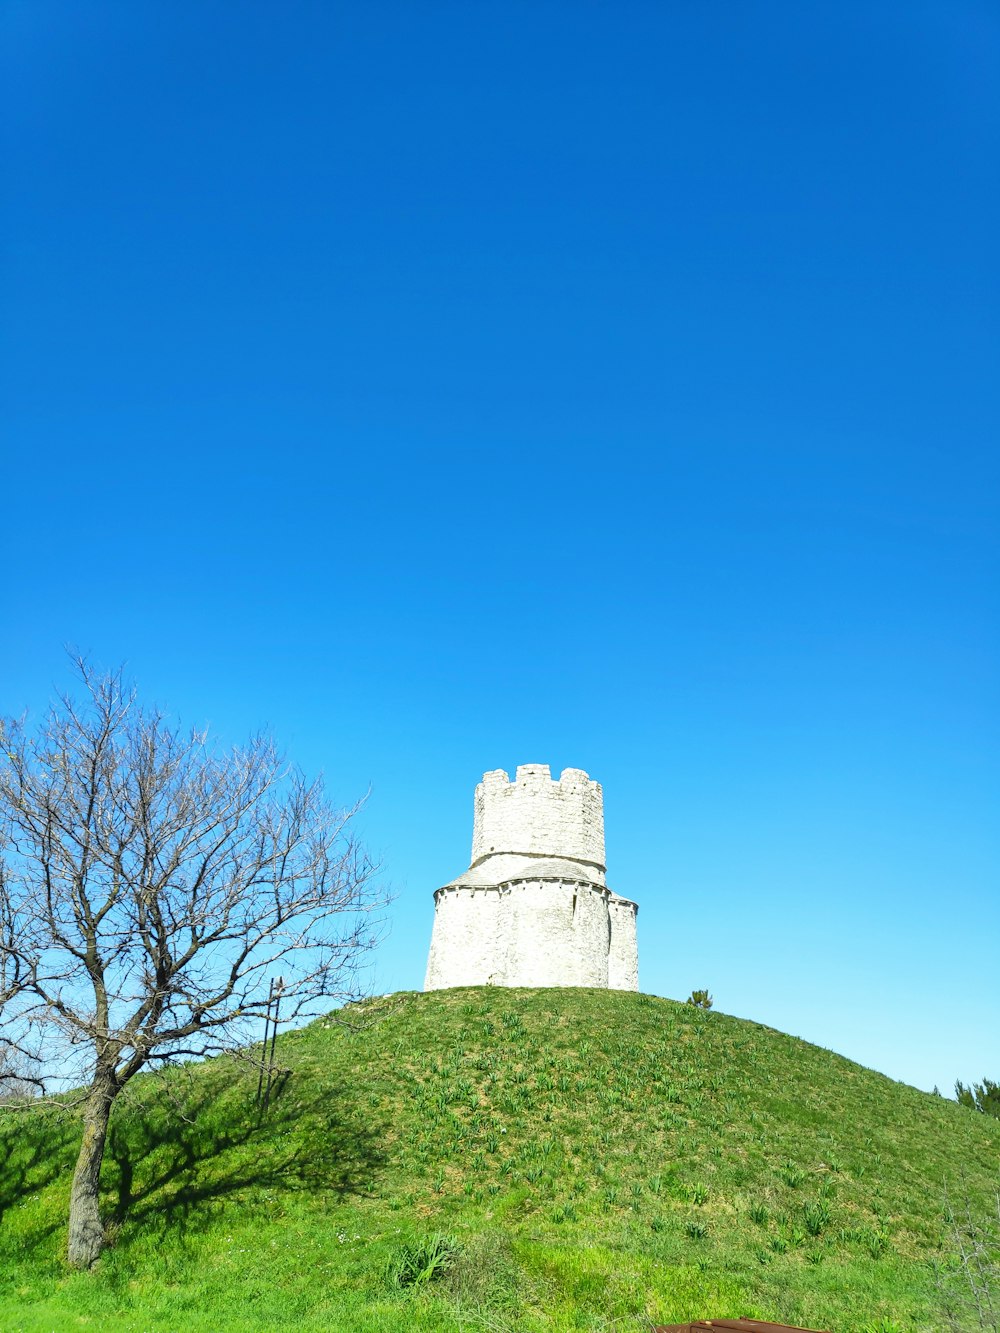 a large white tower sitting on top of a lush green hillside